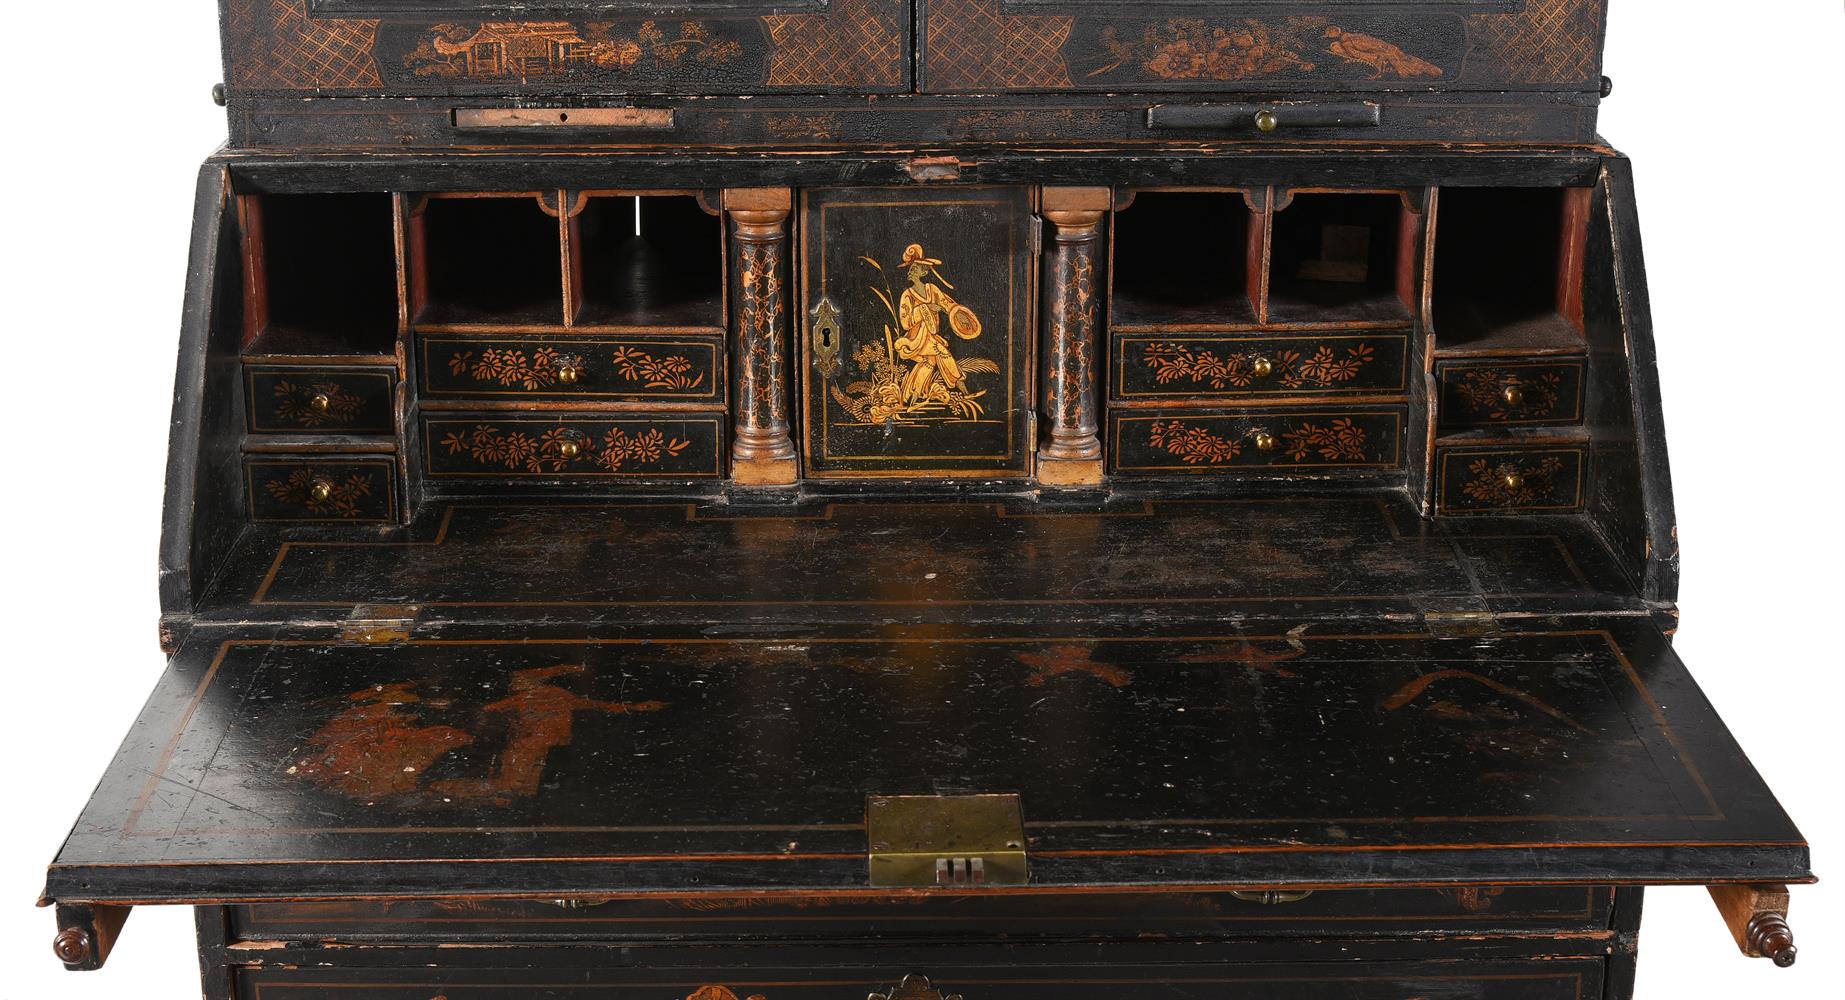 A GEORGE II BLACK LACQUER AND GILT JAPANNED BUREAU CABINET, CIRCA 1740 - Image 7 of 7